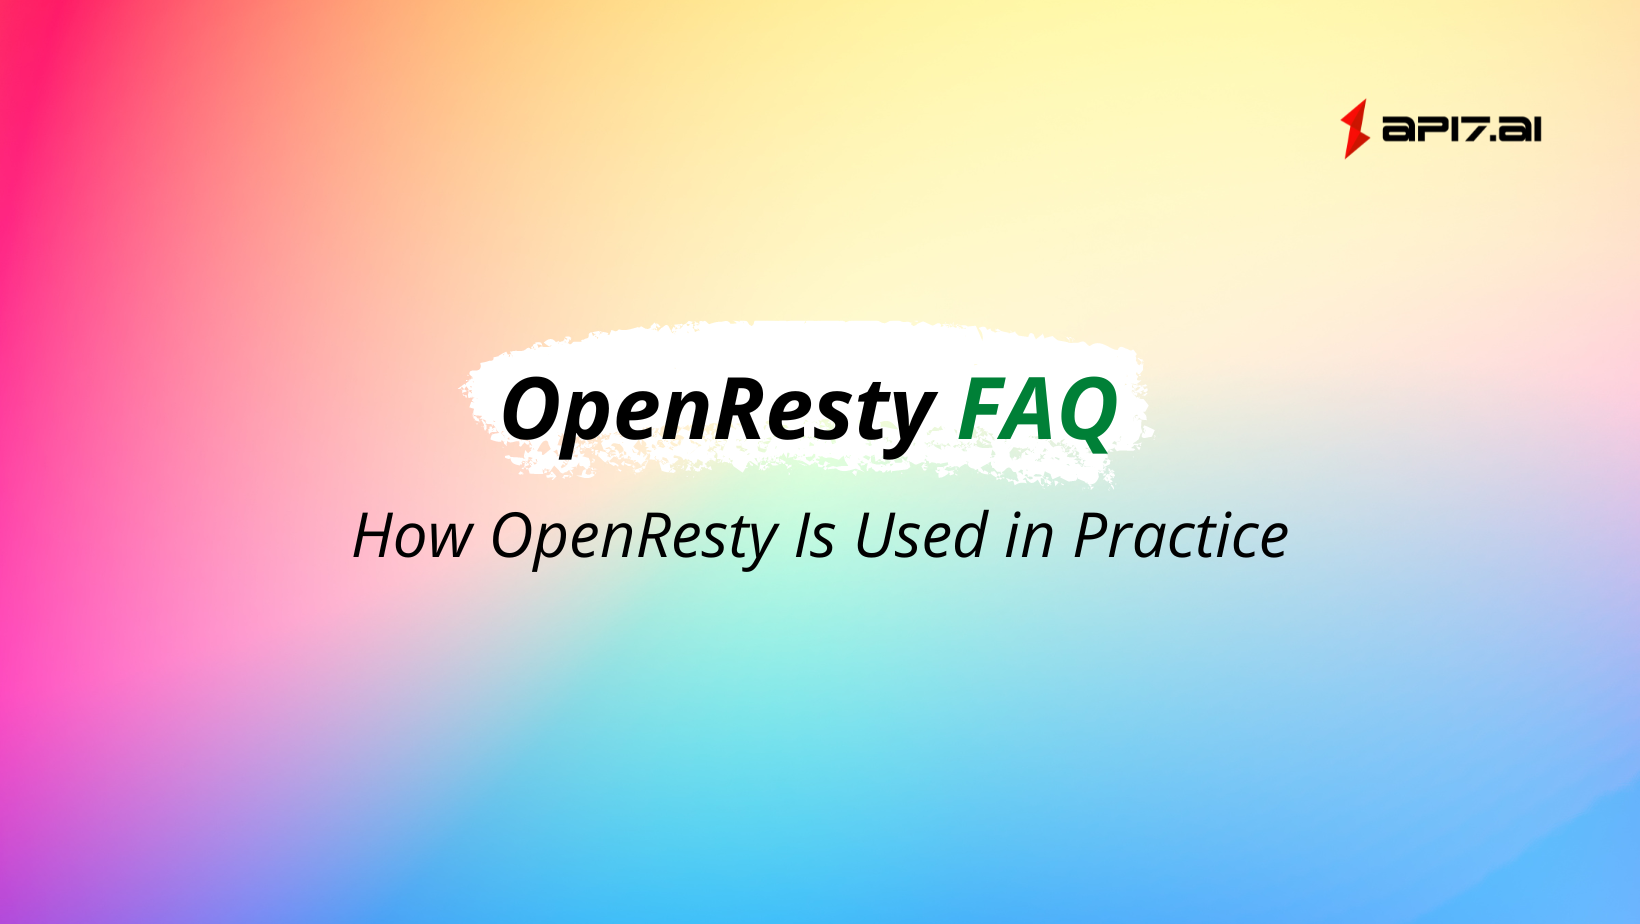 OpenResty FAQ | How OpenResty Is Used in Practice